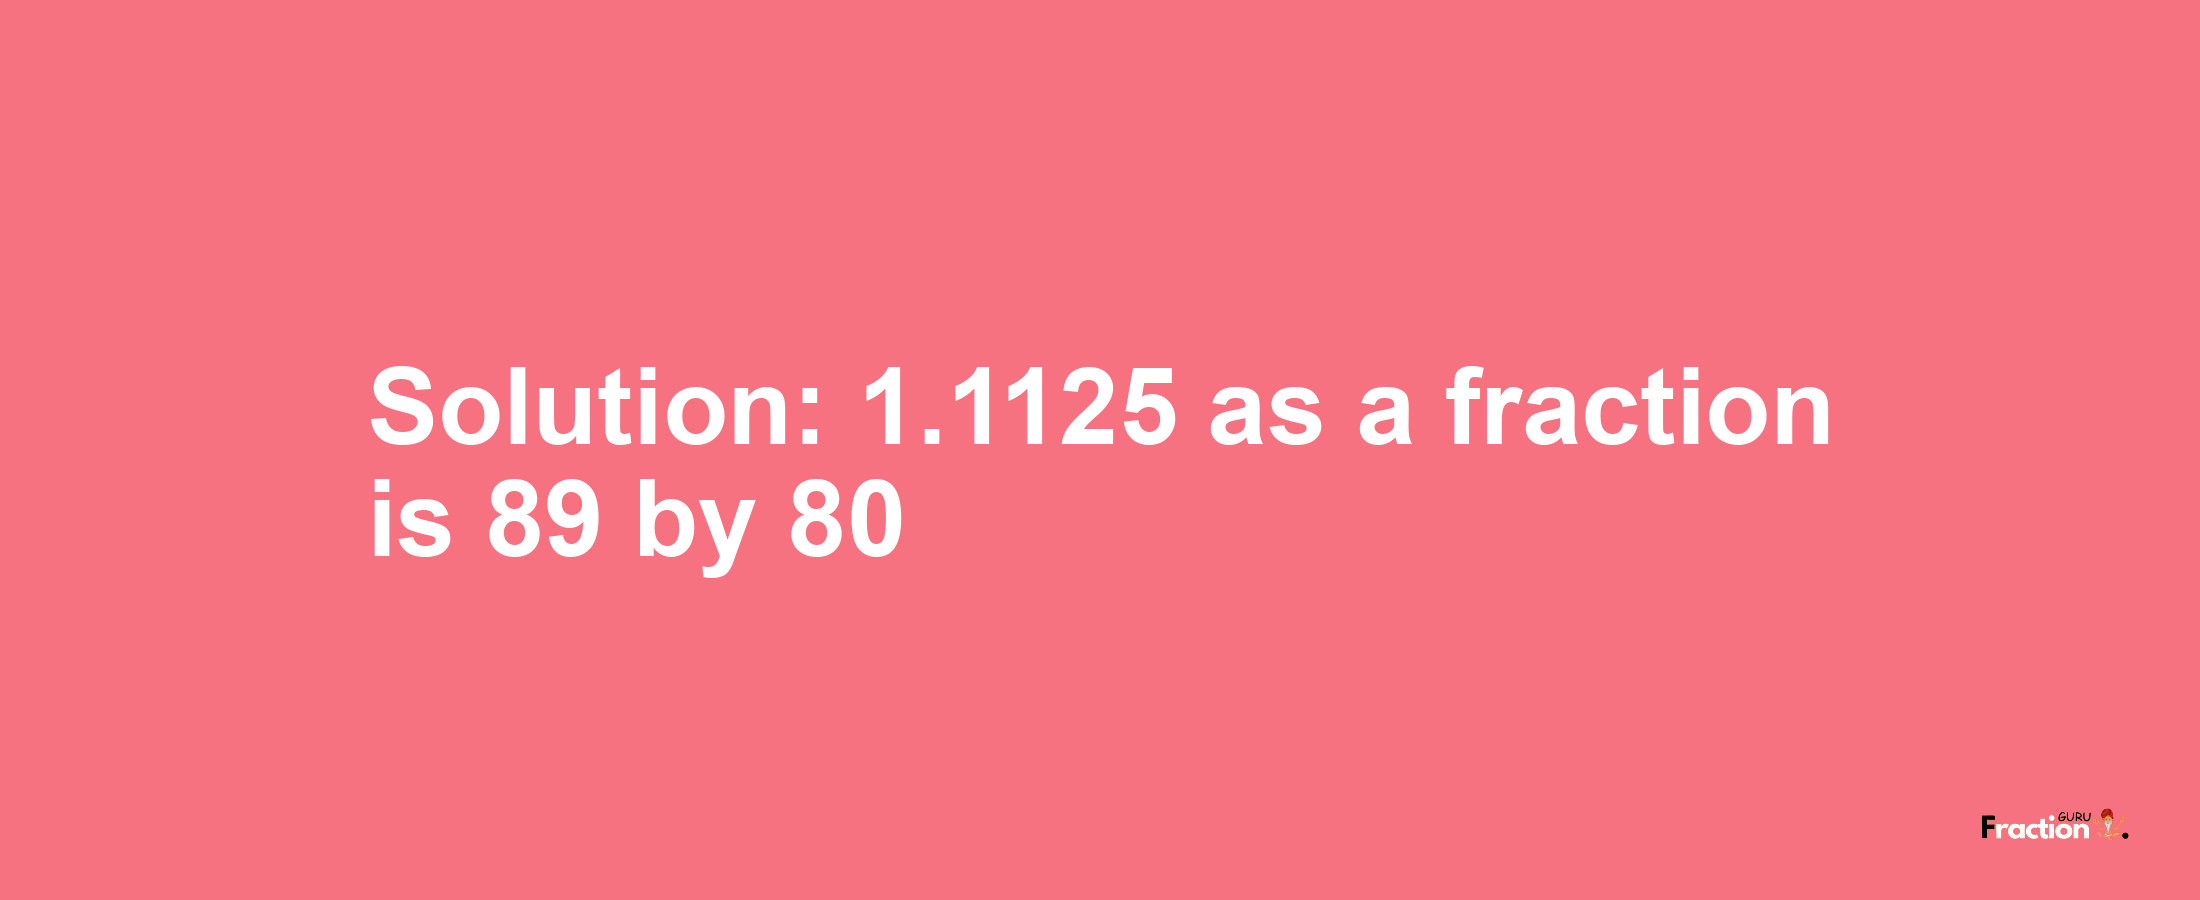 Solution:1.1125 as a fraction is 89/80